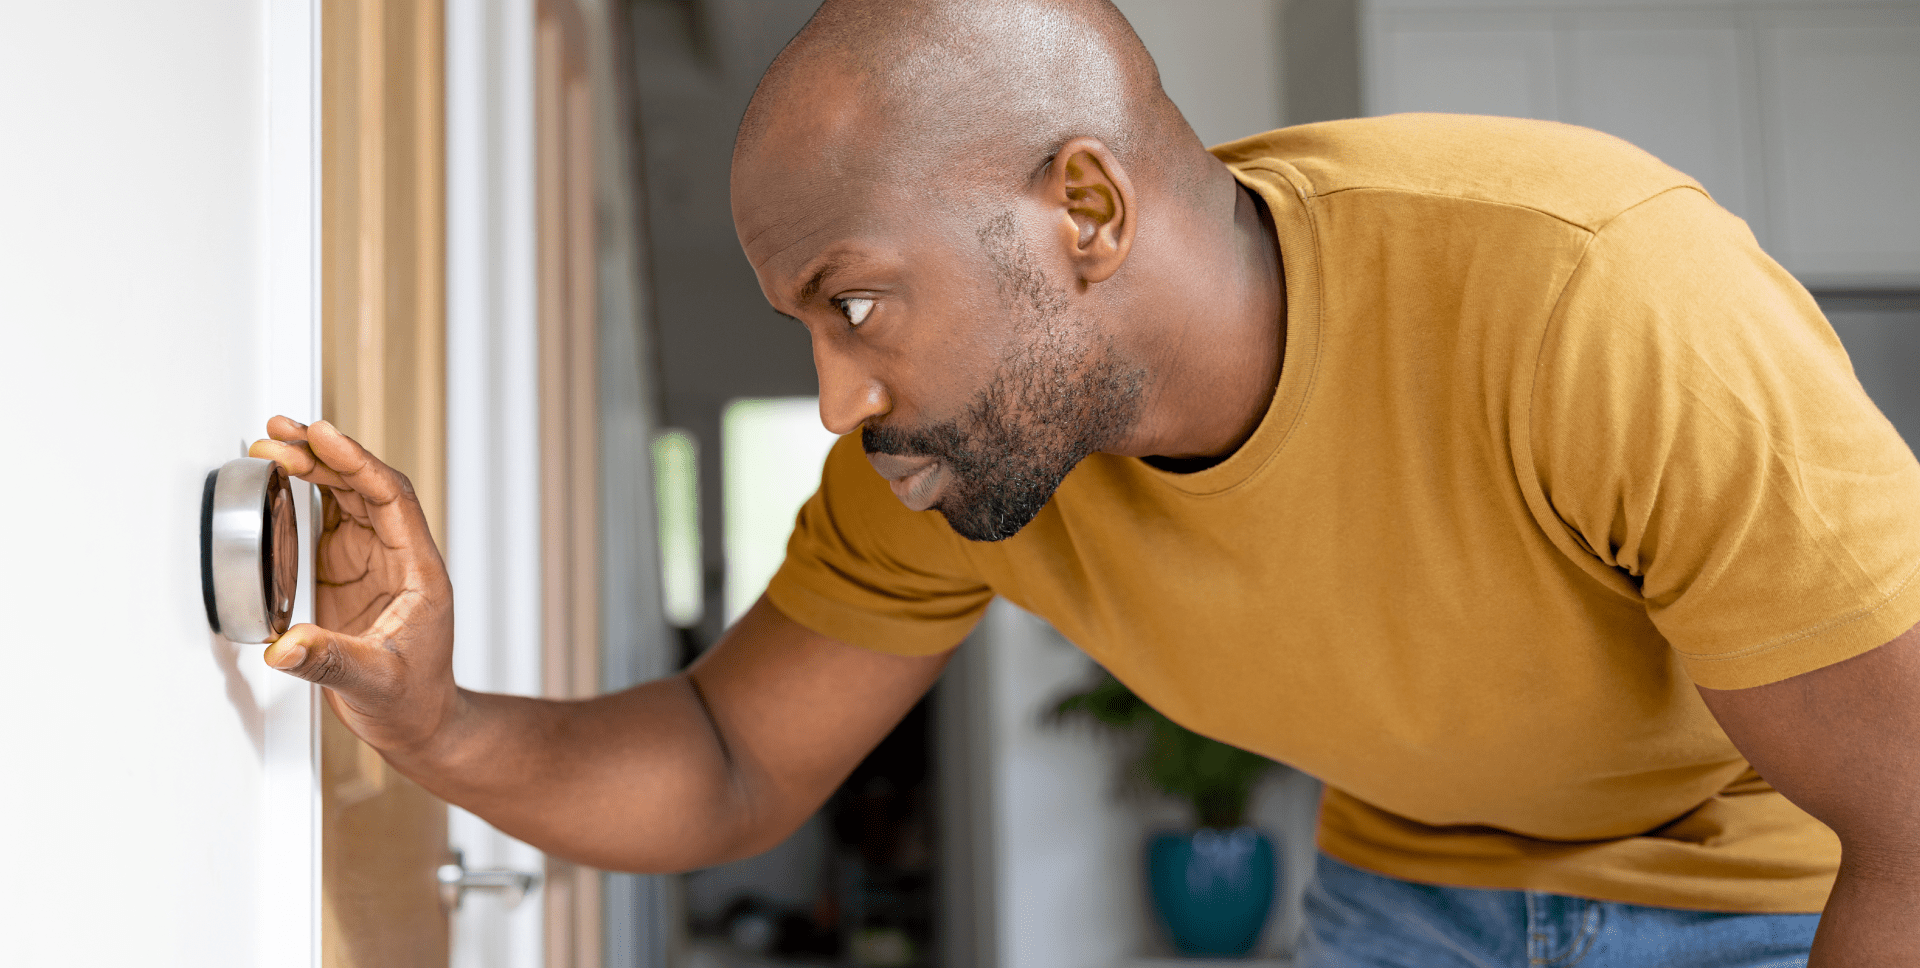 A man adjusts a wall-mounted thermostat.